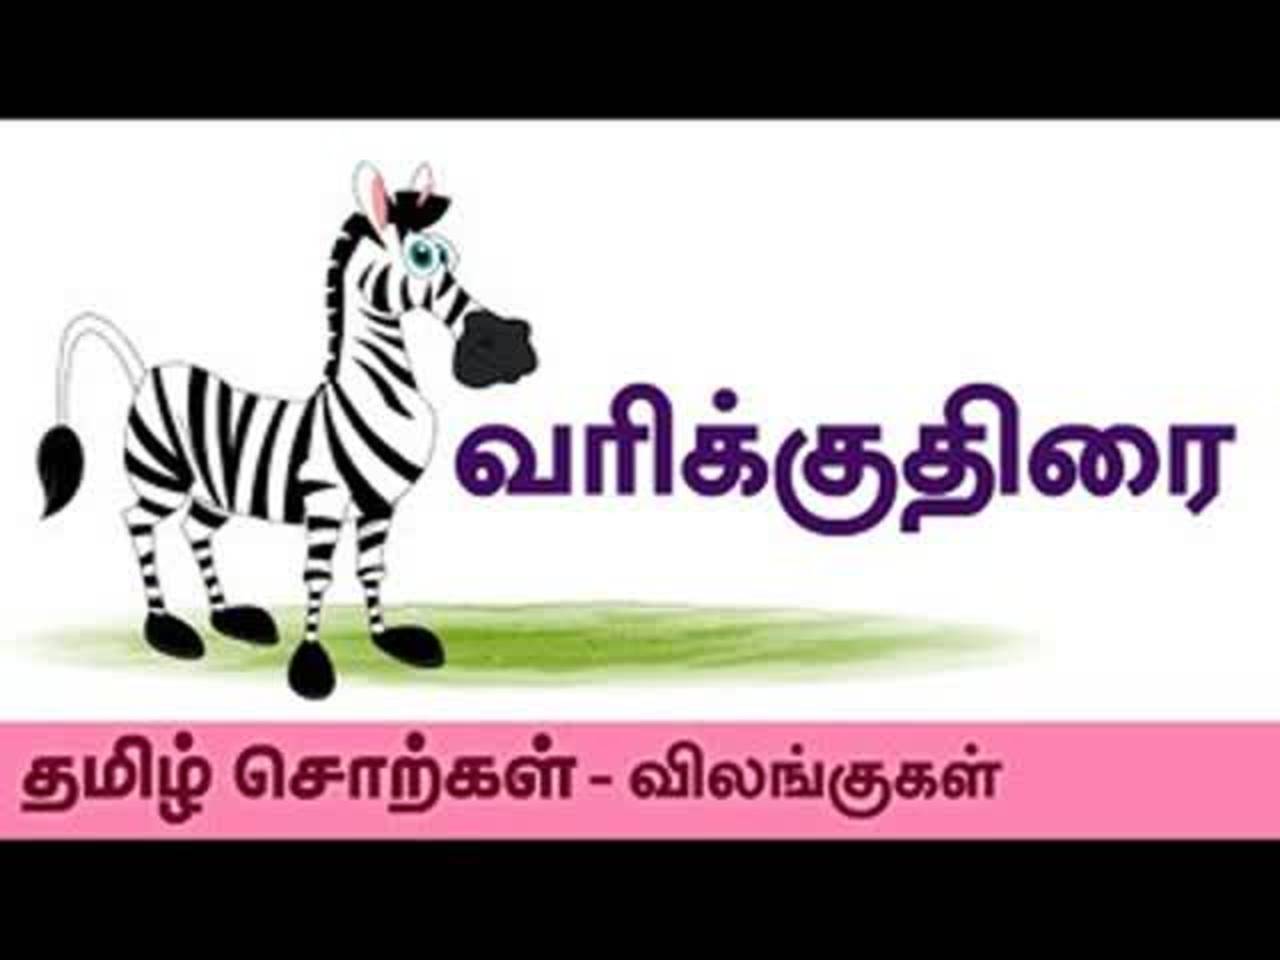 Animals Spelling In Tamil 'வரிக்குதிரை' - Kids Learning Video In Tamil |  Entertainment - Times of India Videos